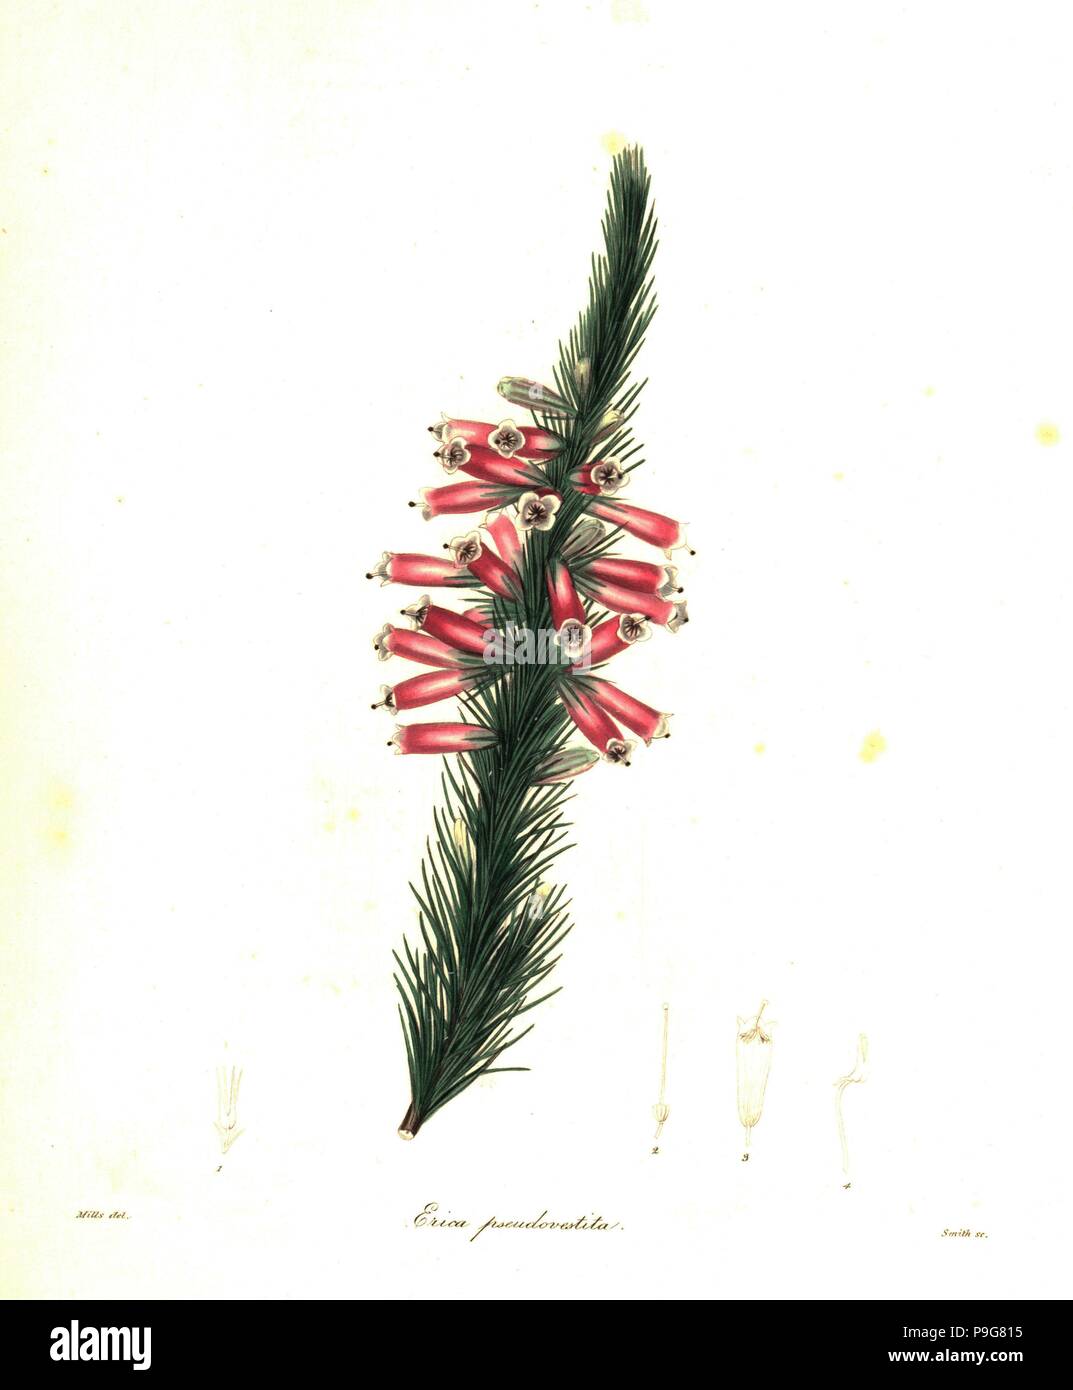 Masson's heath, Erica massonii (Clothed hybrid heath, Erica pseudo-vestita). Handcoloured copperplate engraving by Smith after a botanical illustration by MIlls from Benjamin Maund and the Rev. John Stevens Henslow's The Botanist, London, 1836. Stock Photo